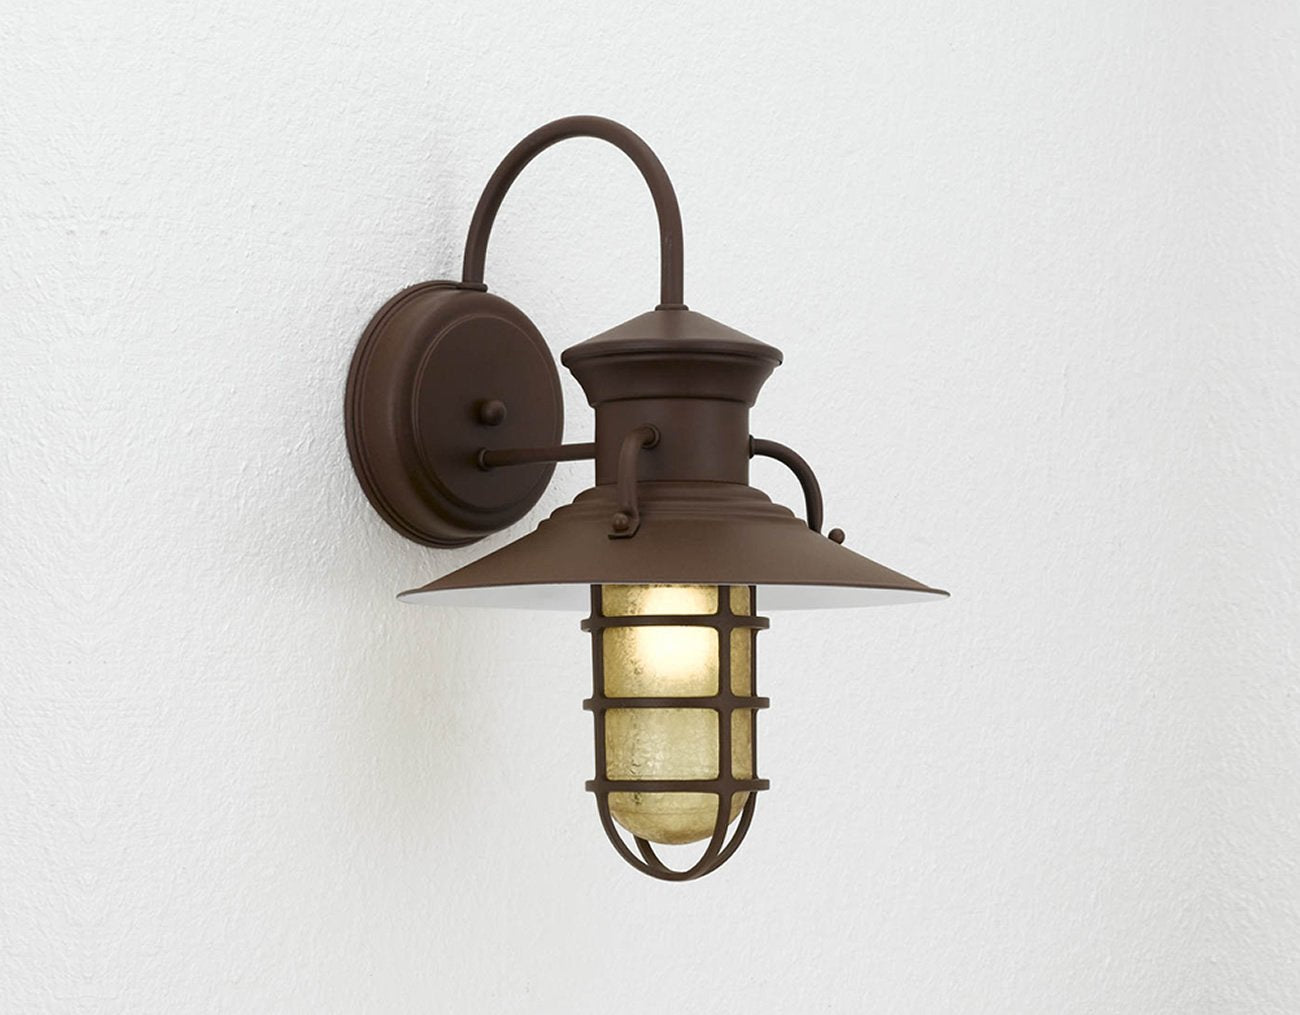 Hi-Lite Radial Shade Sconce - 12" (shown w/ Rust finish, cast guard and amber crackle glass)